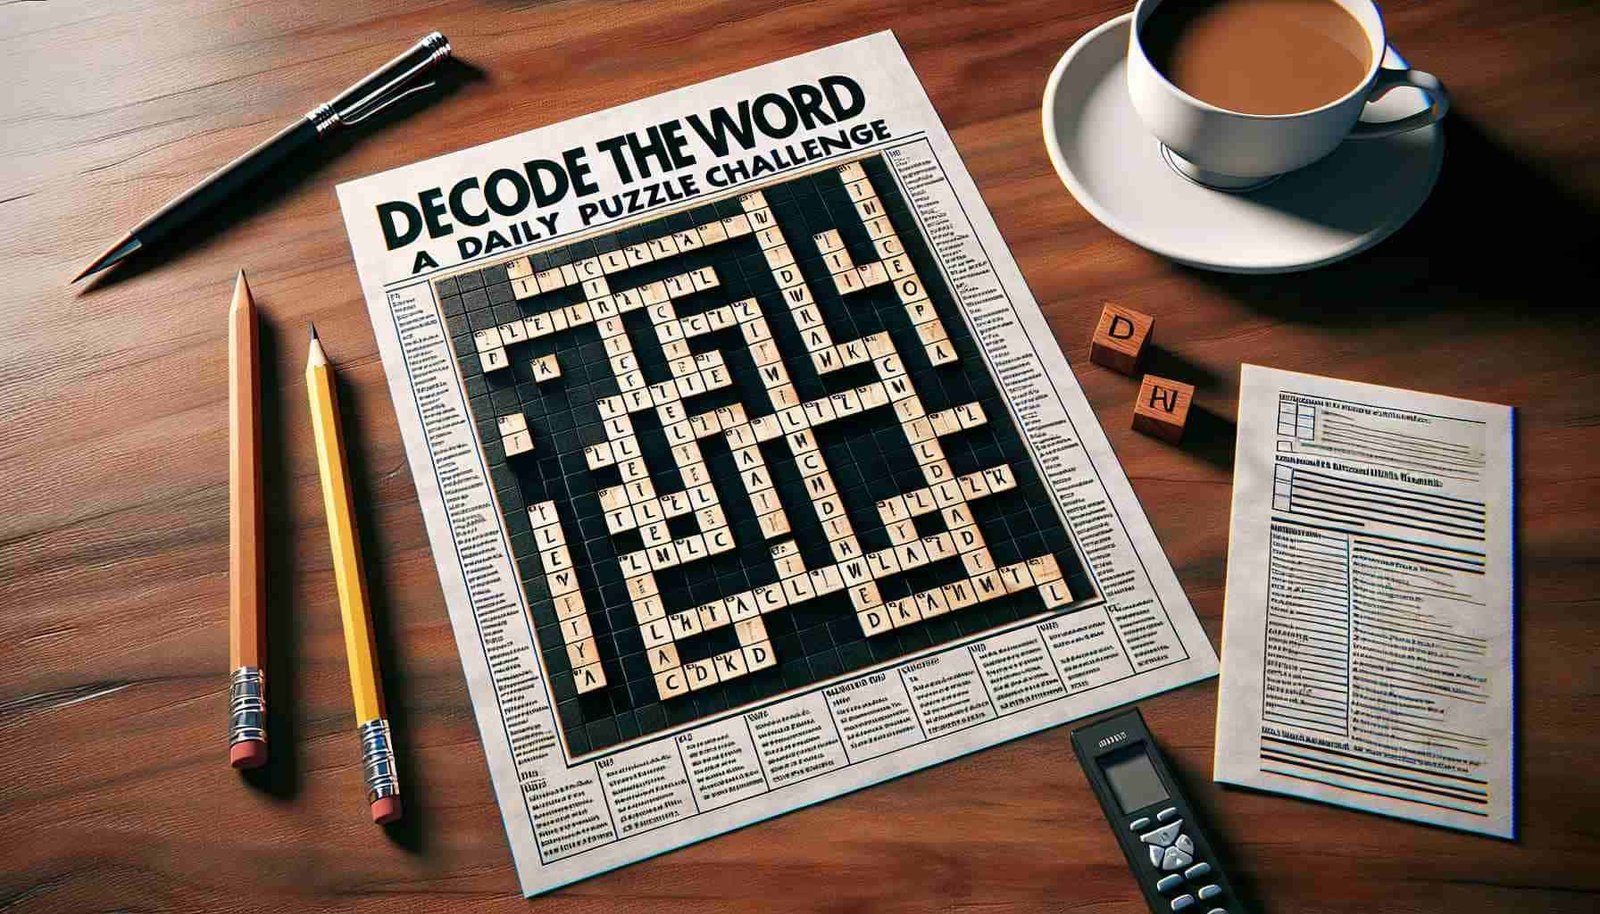 Decoding Daily Word Challenges